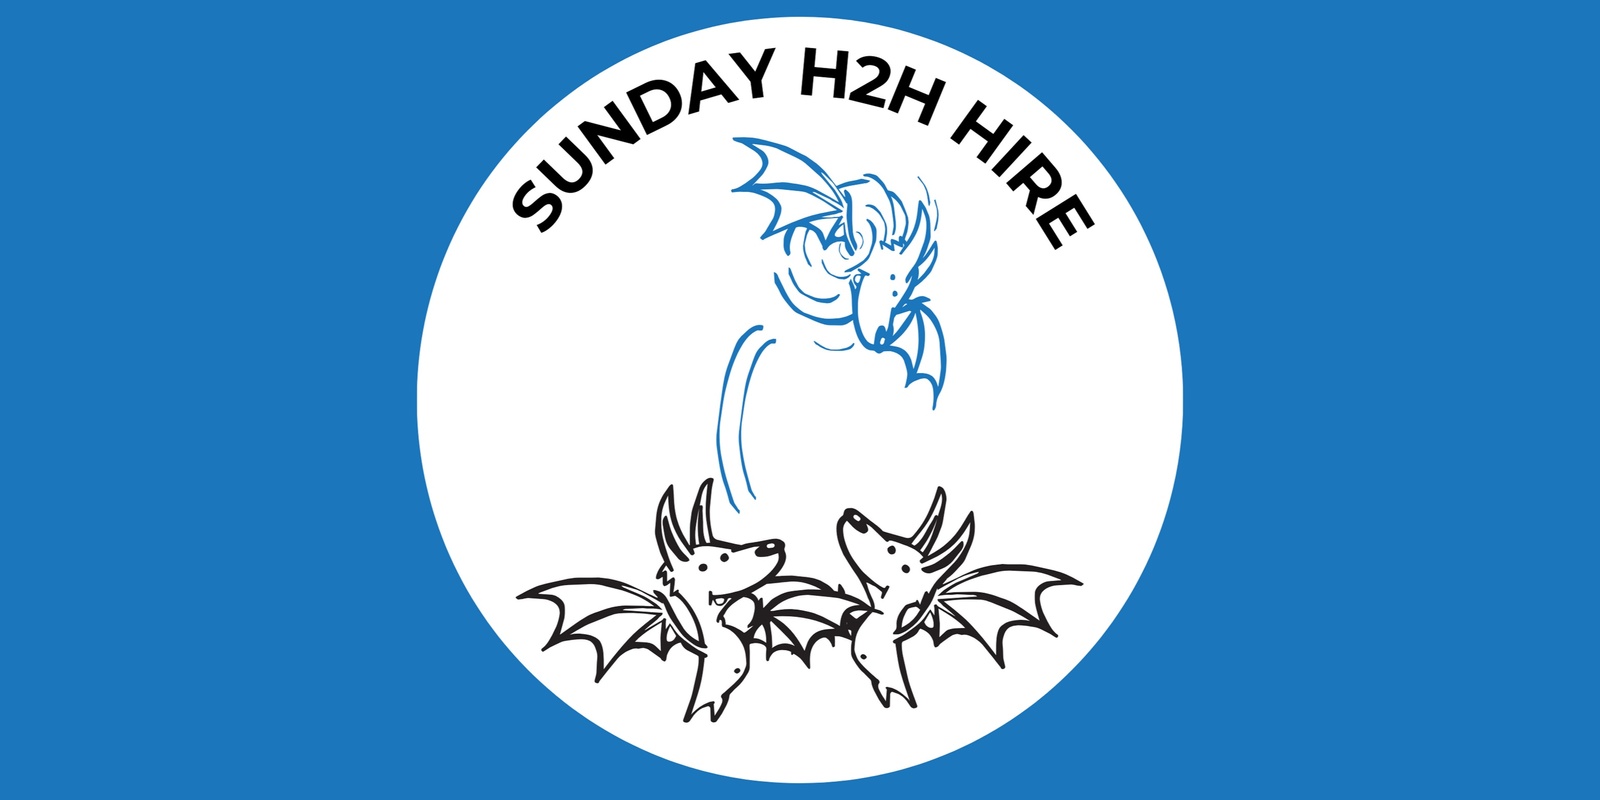 Banner image for Sunday H2h Space Hire